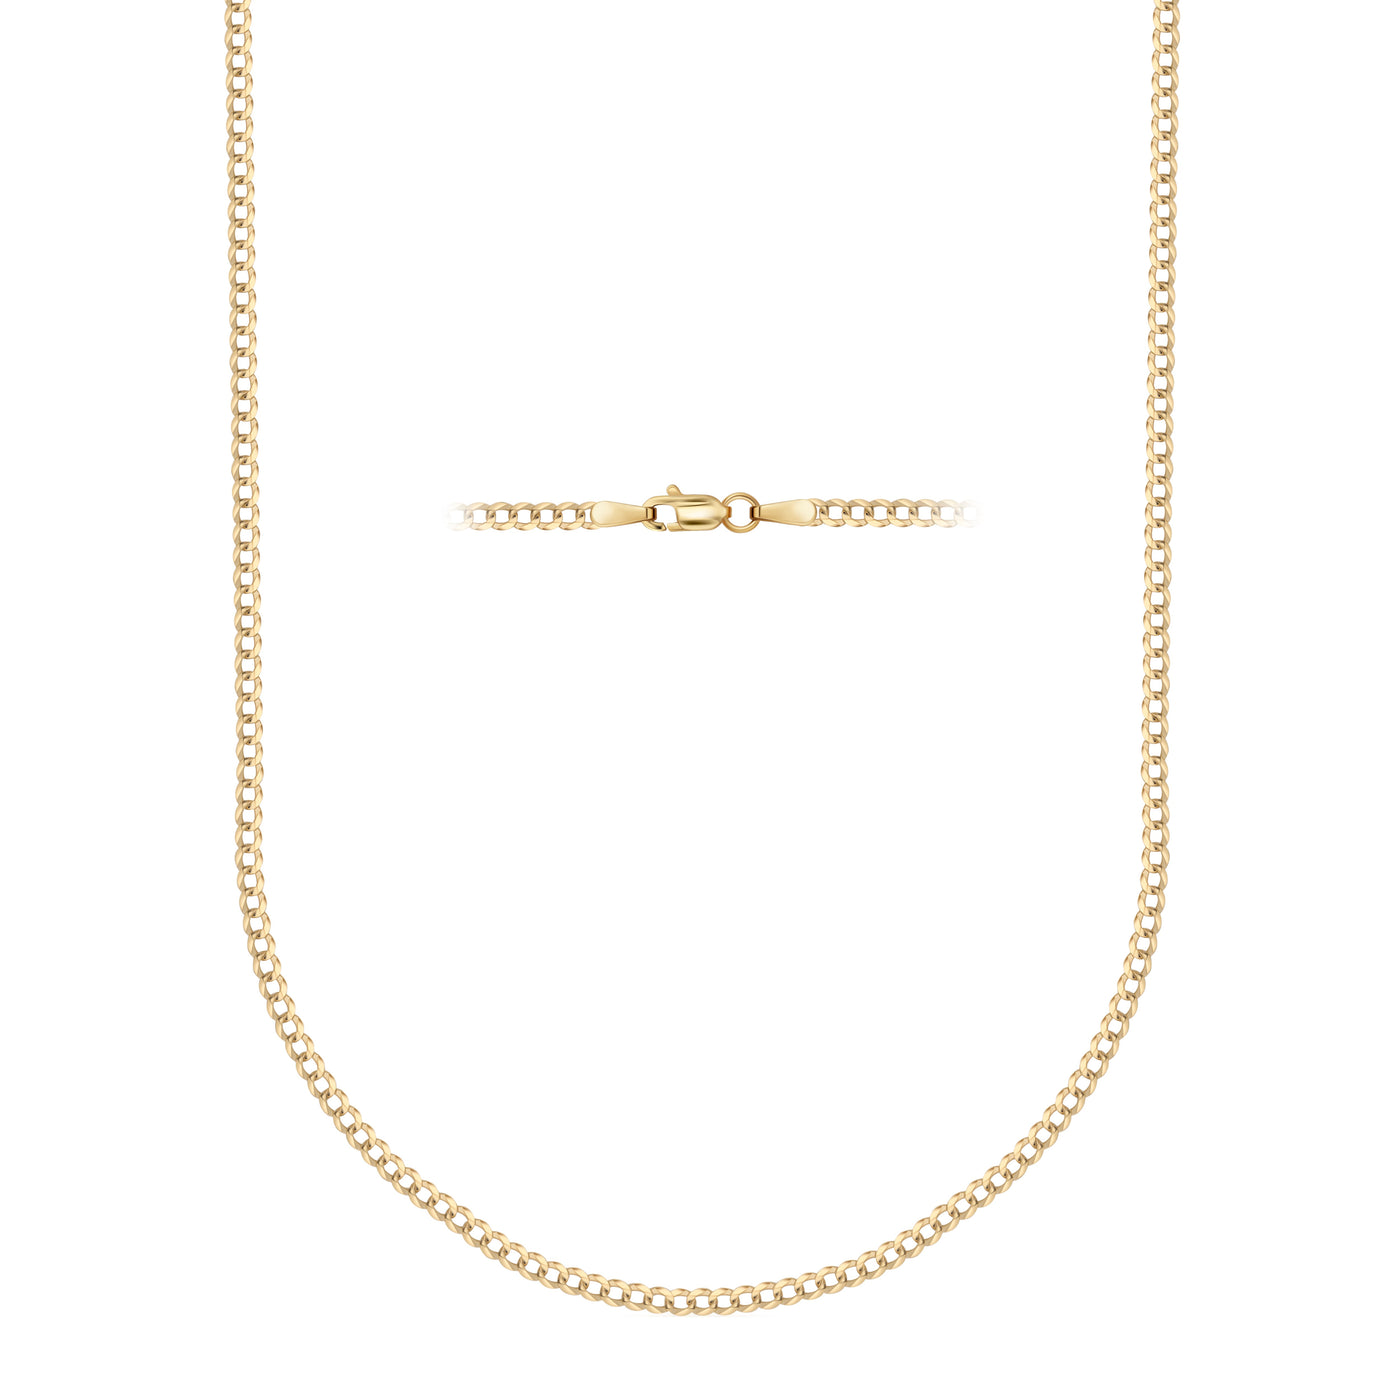 10K Gold Hollow Cuban/Curb Link Chain Necklaces